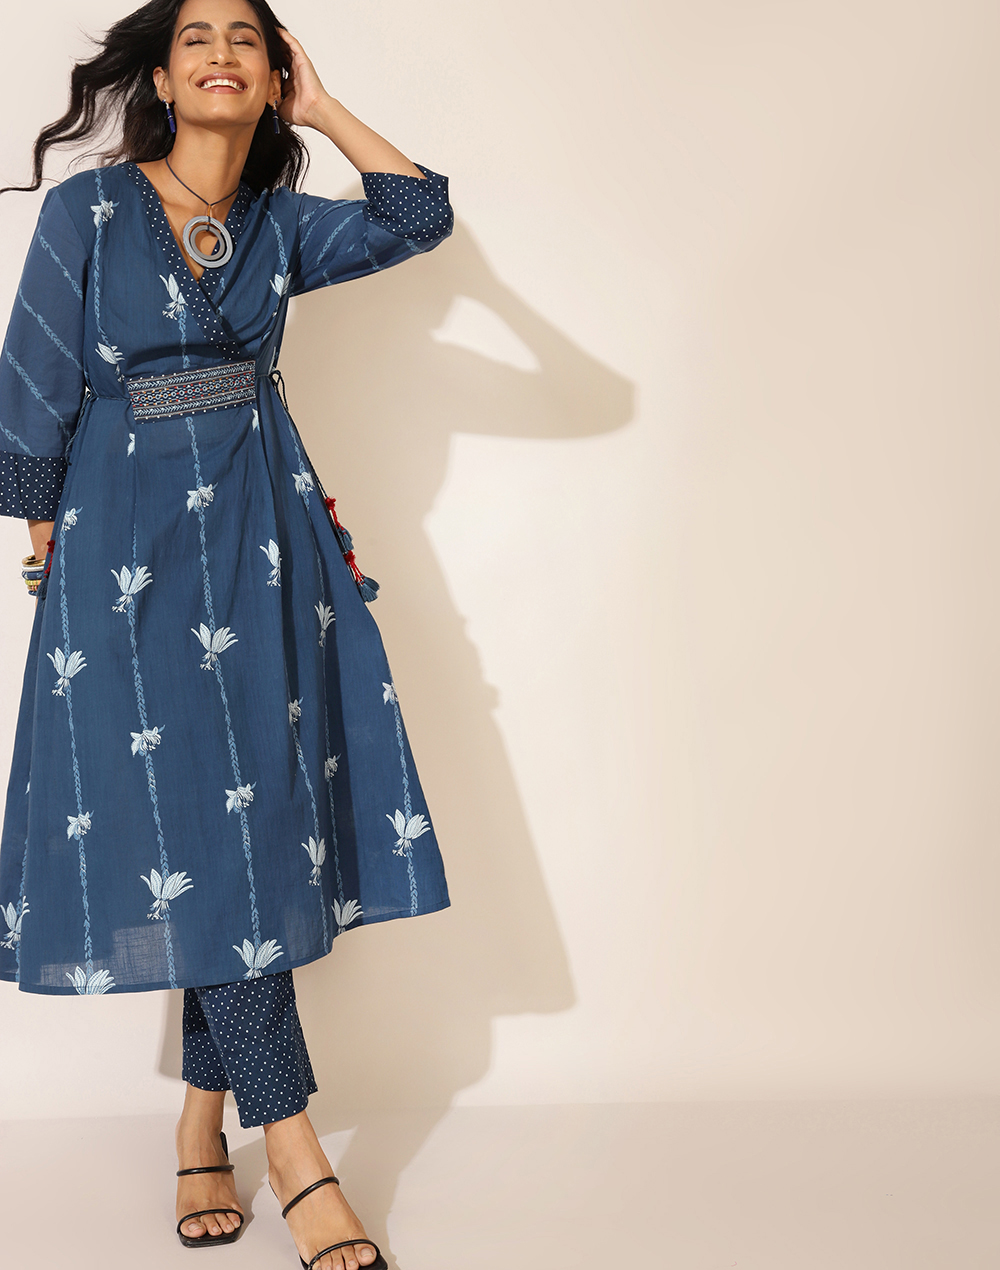 Vee Fab India Launched Jolie Rayon Printed Designer Kurtis Collection -  STALK YOUR FASHION